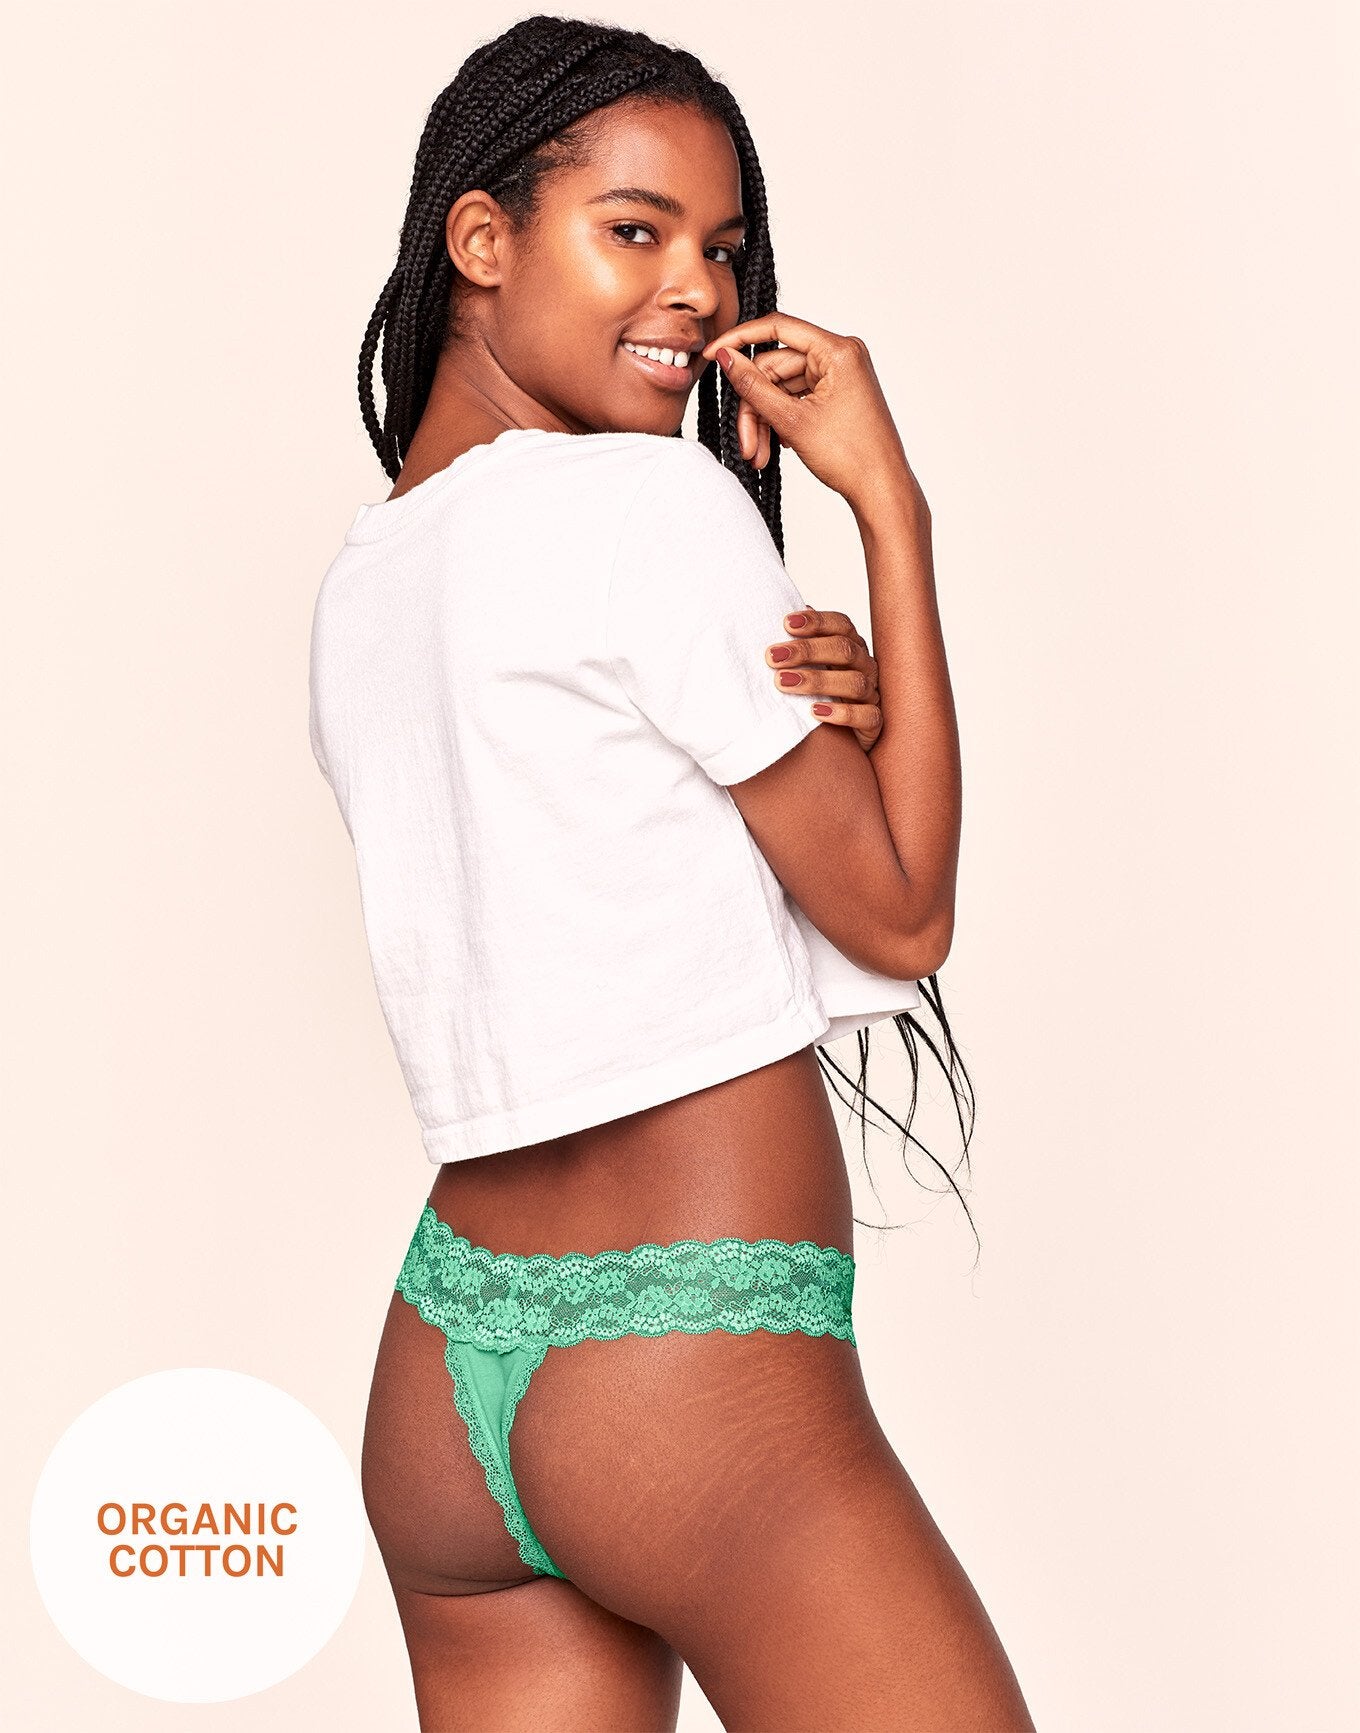 Victoria's Secret Pink Period Panties are Here - Are They Worth